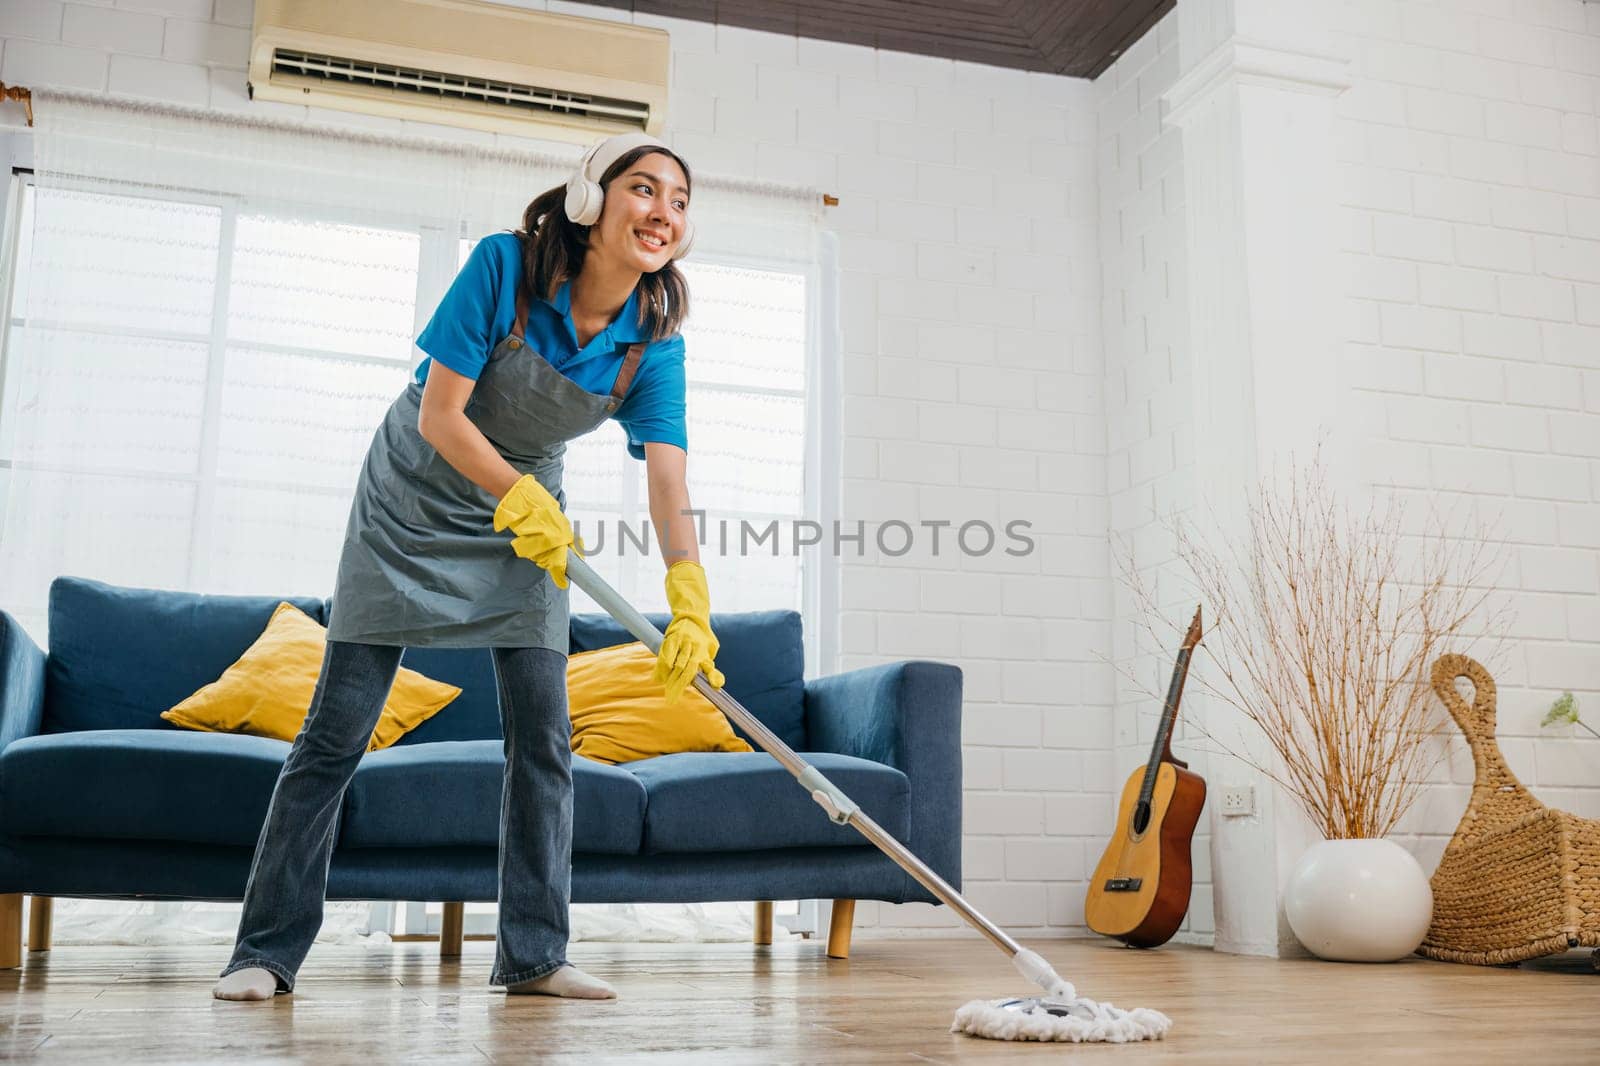 Asian teenager vibrant cleanup, maid sings dances in headphones. Joyful occupation blended with music excitement. Modern cleaning with tech appeal. Happy and Fun During Cleaning by Sorapop